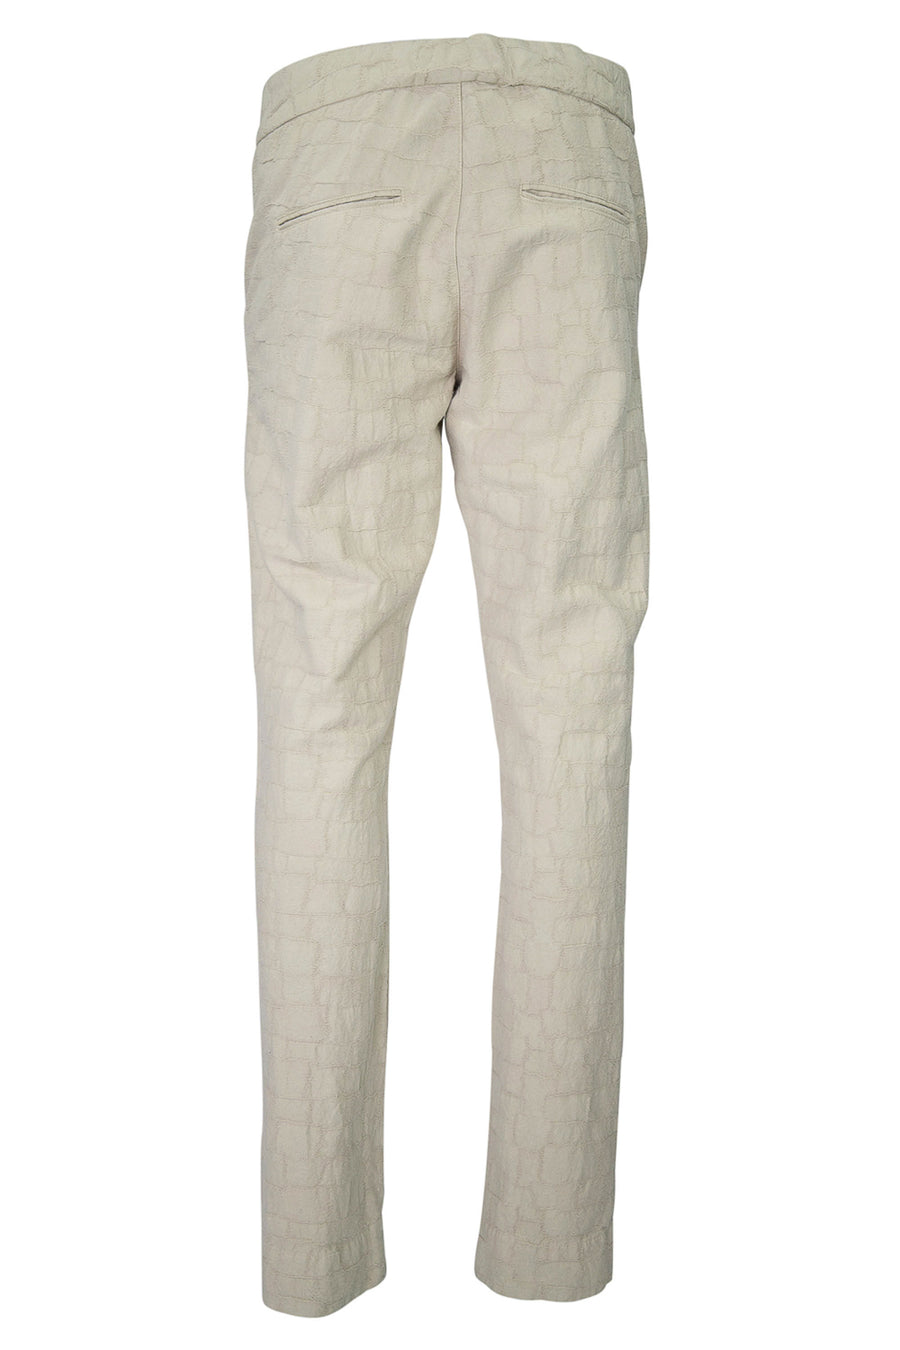 Buy the Hannes Roether Croc-Effect Cotton Trouser in Off White at Intro. Spend £50 for free UK delivery. Official stockists. We ship worldwide.